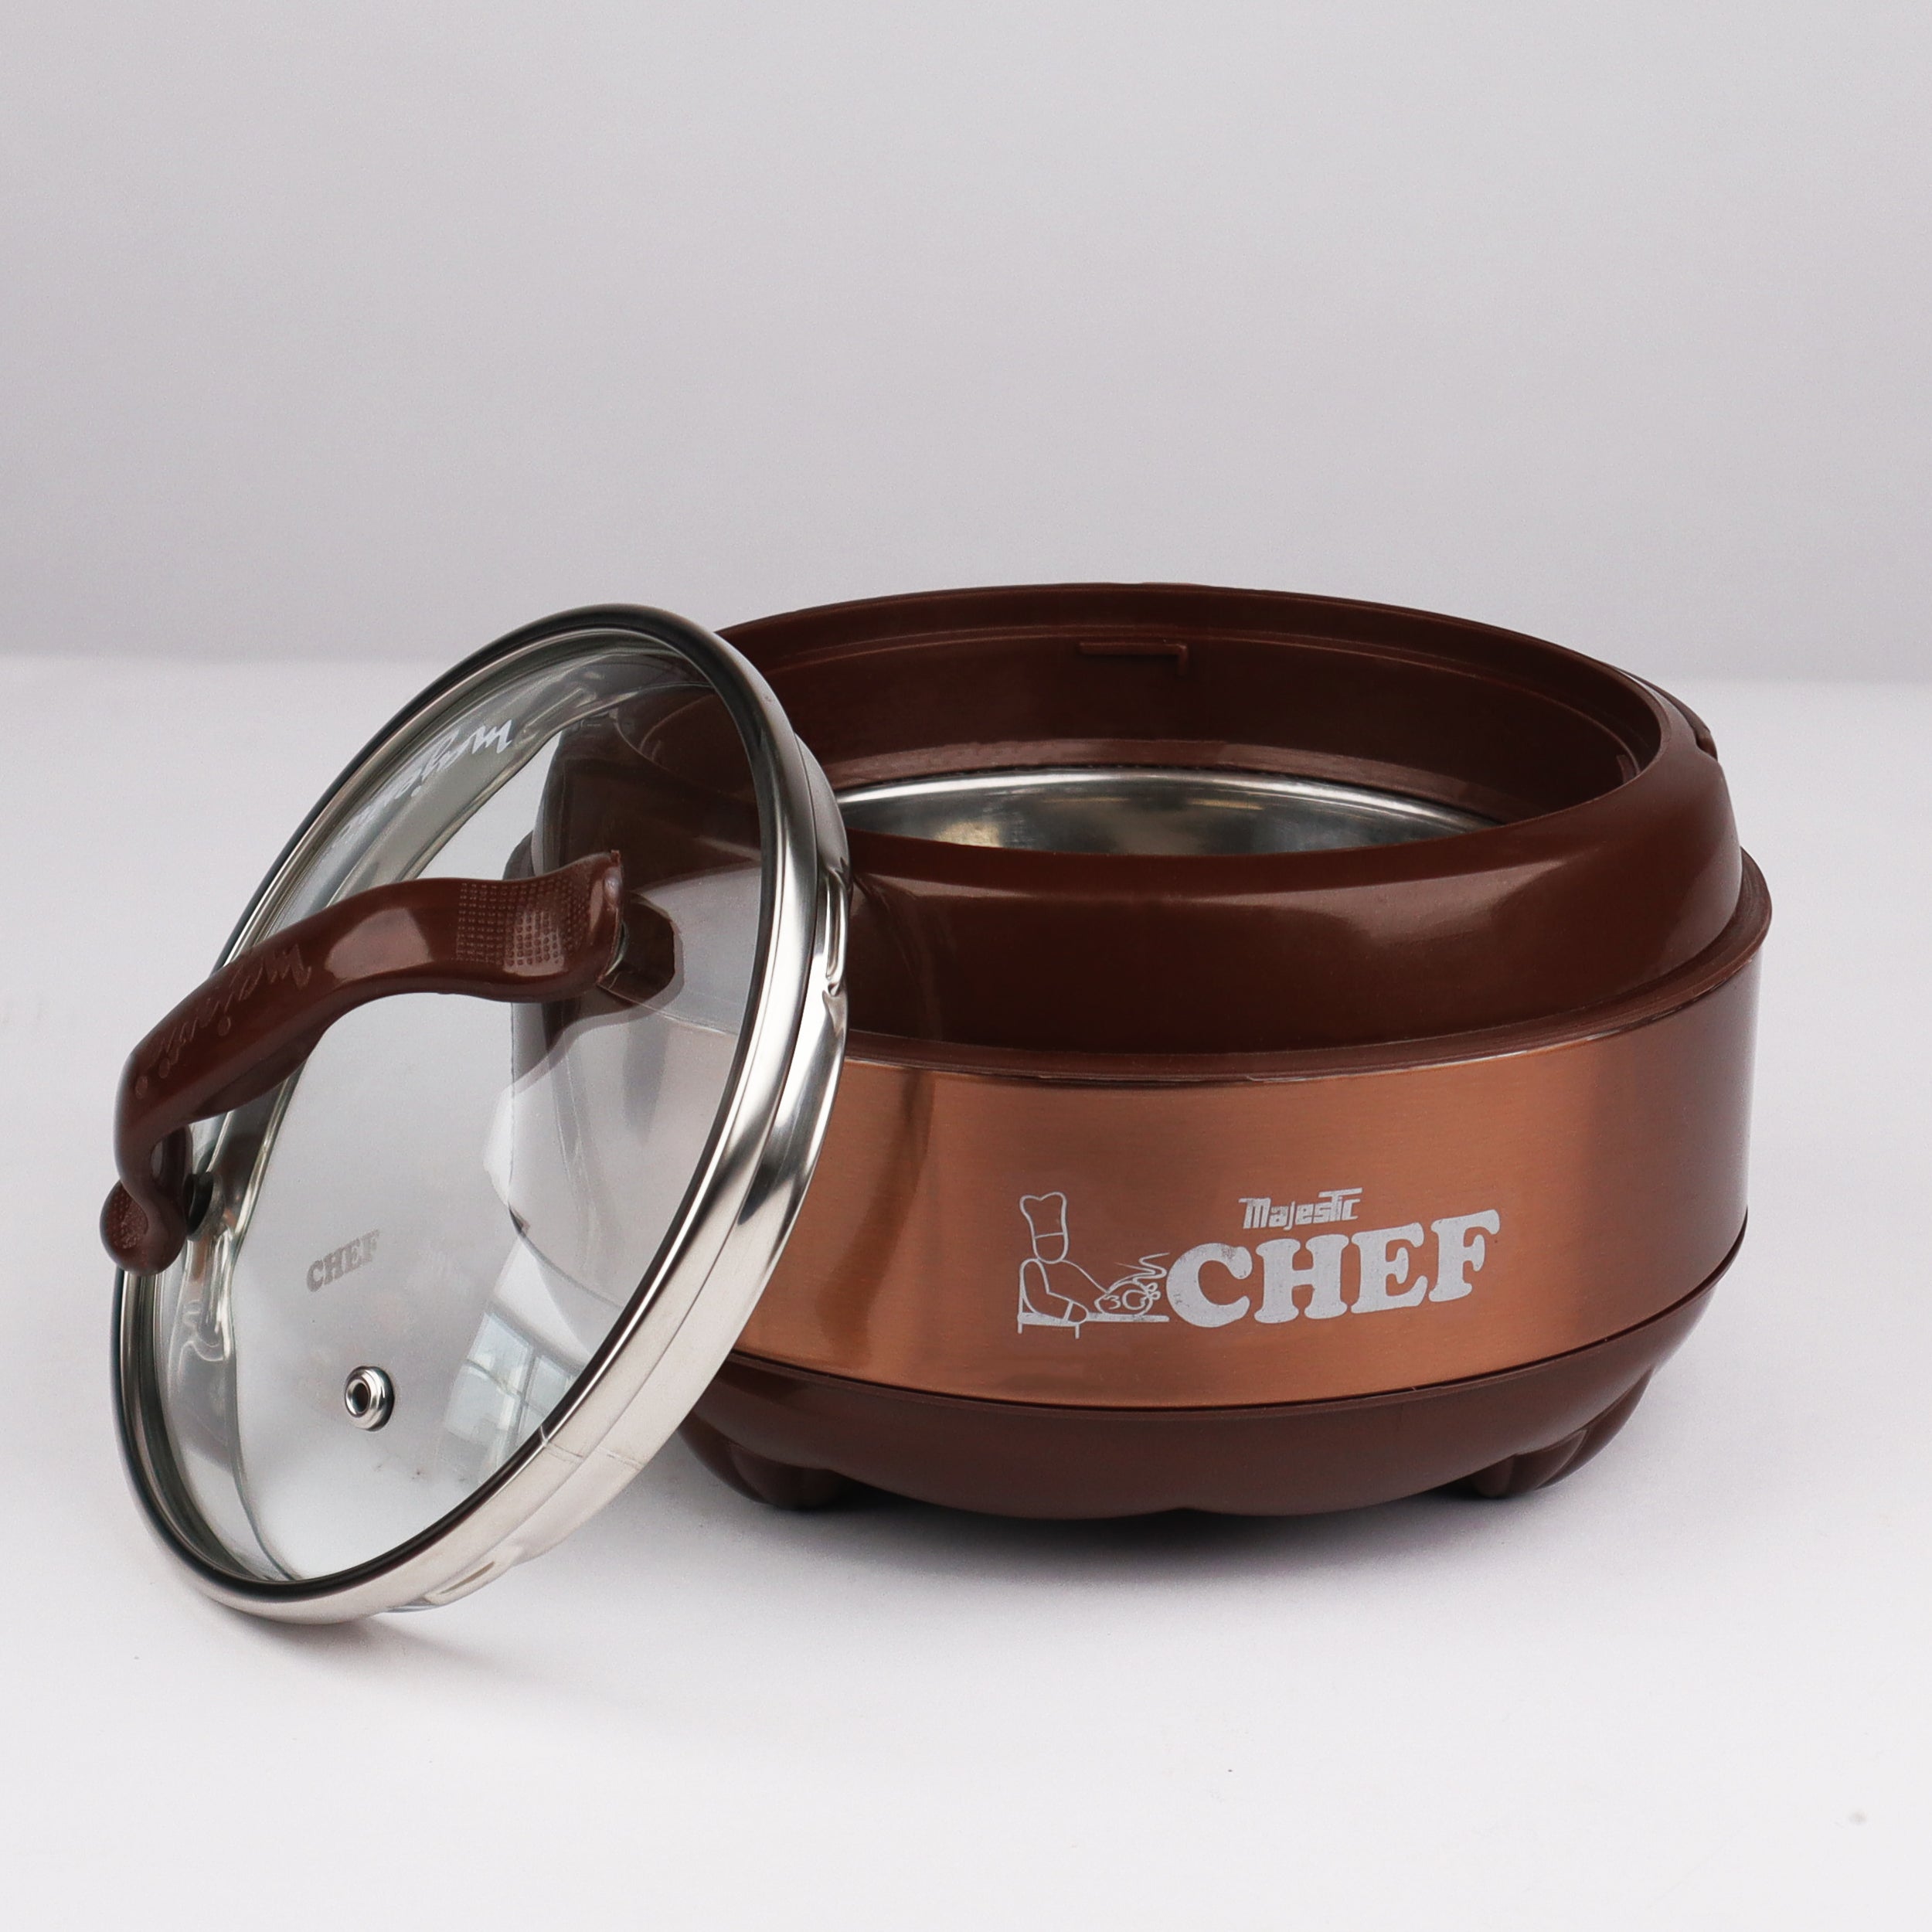 Majestic Chef Stainless Steel Hot Pot With Glass Lid - Brown - Large 4 L 